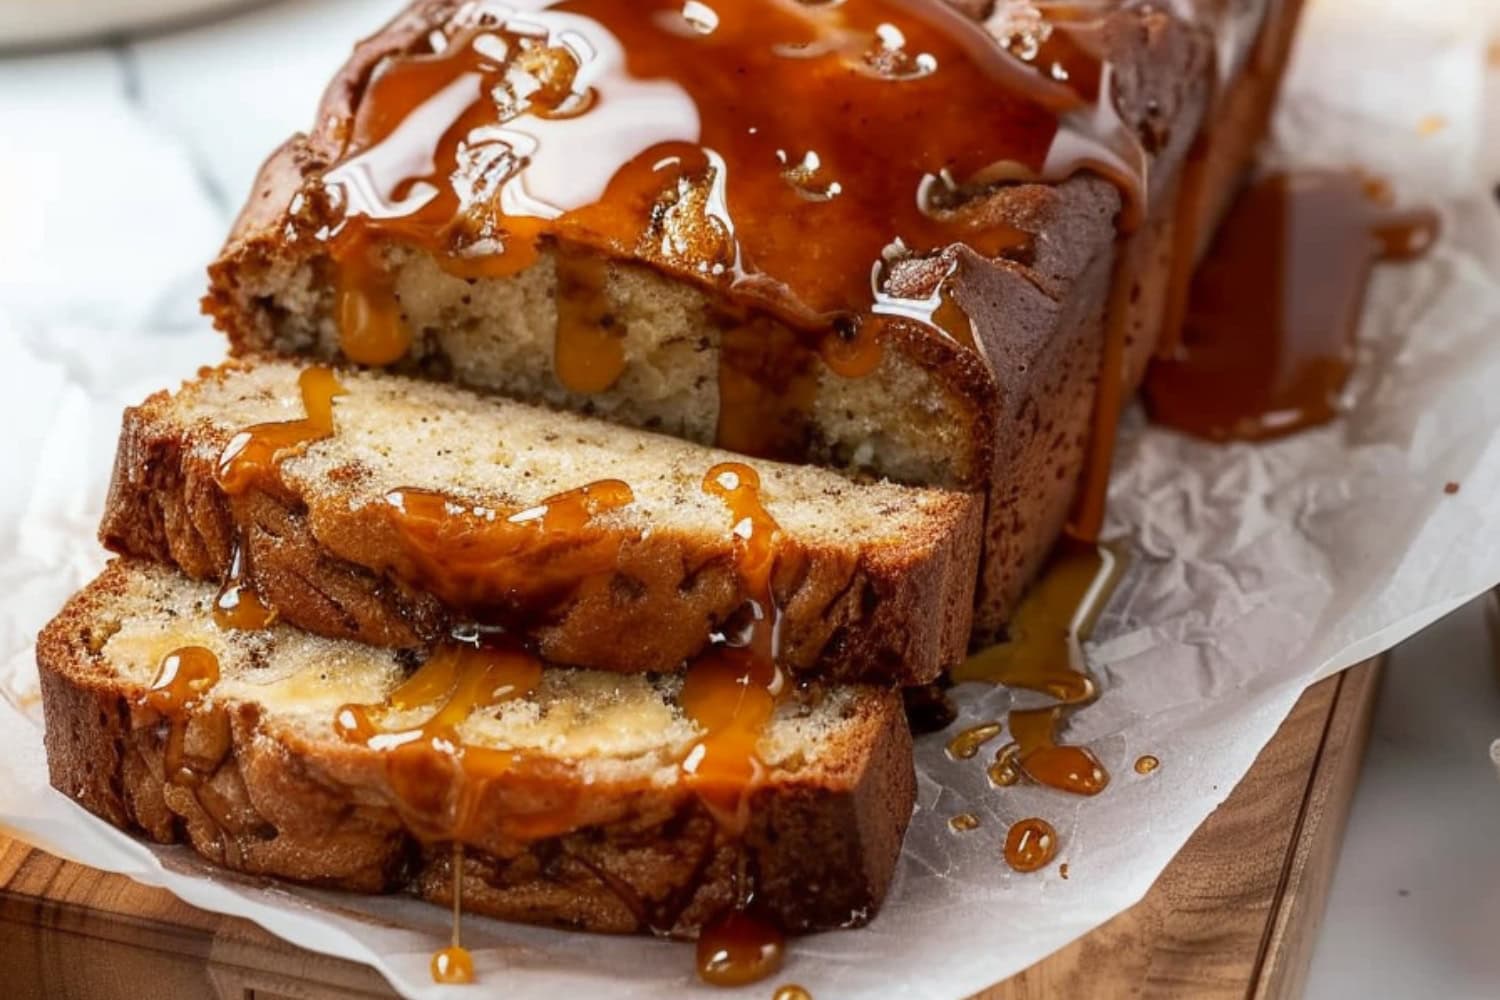 Sliced banana loaf bread drizzled with salted caramel syrup.